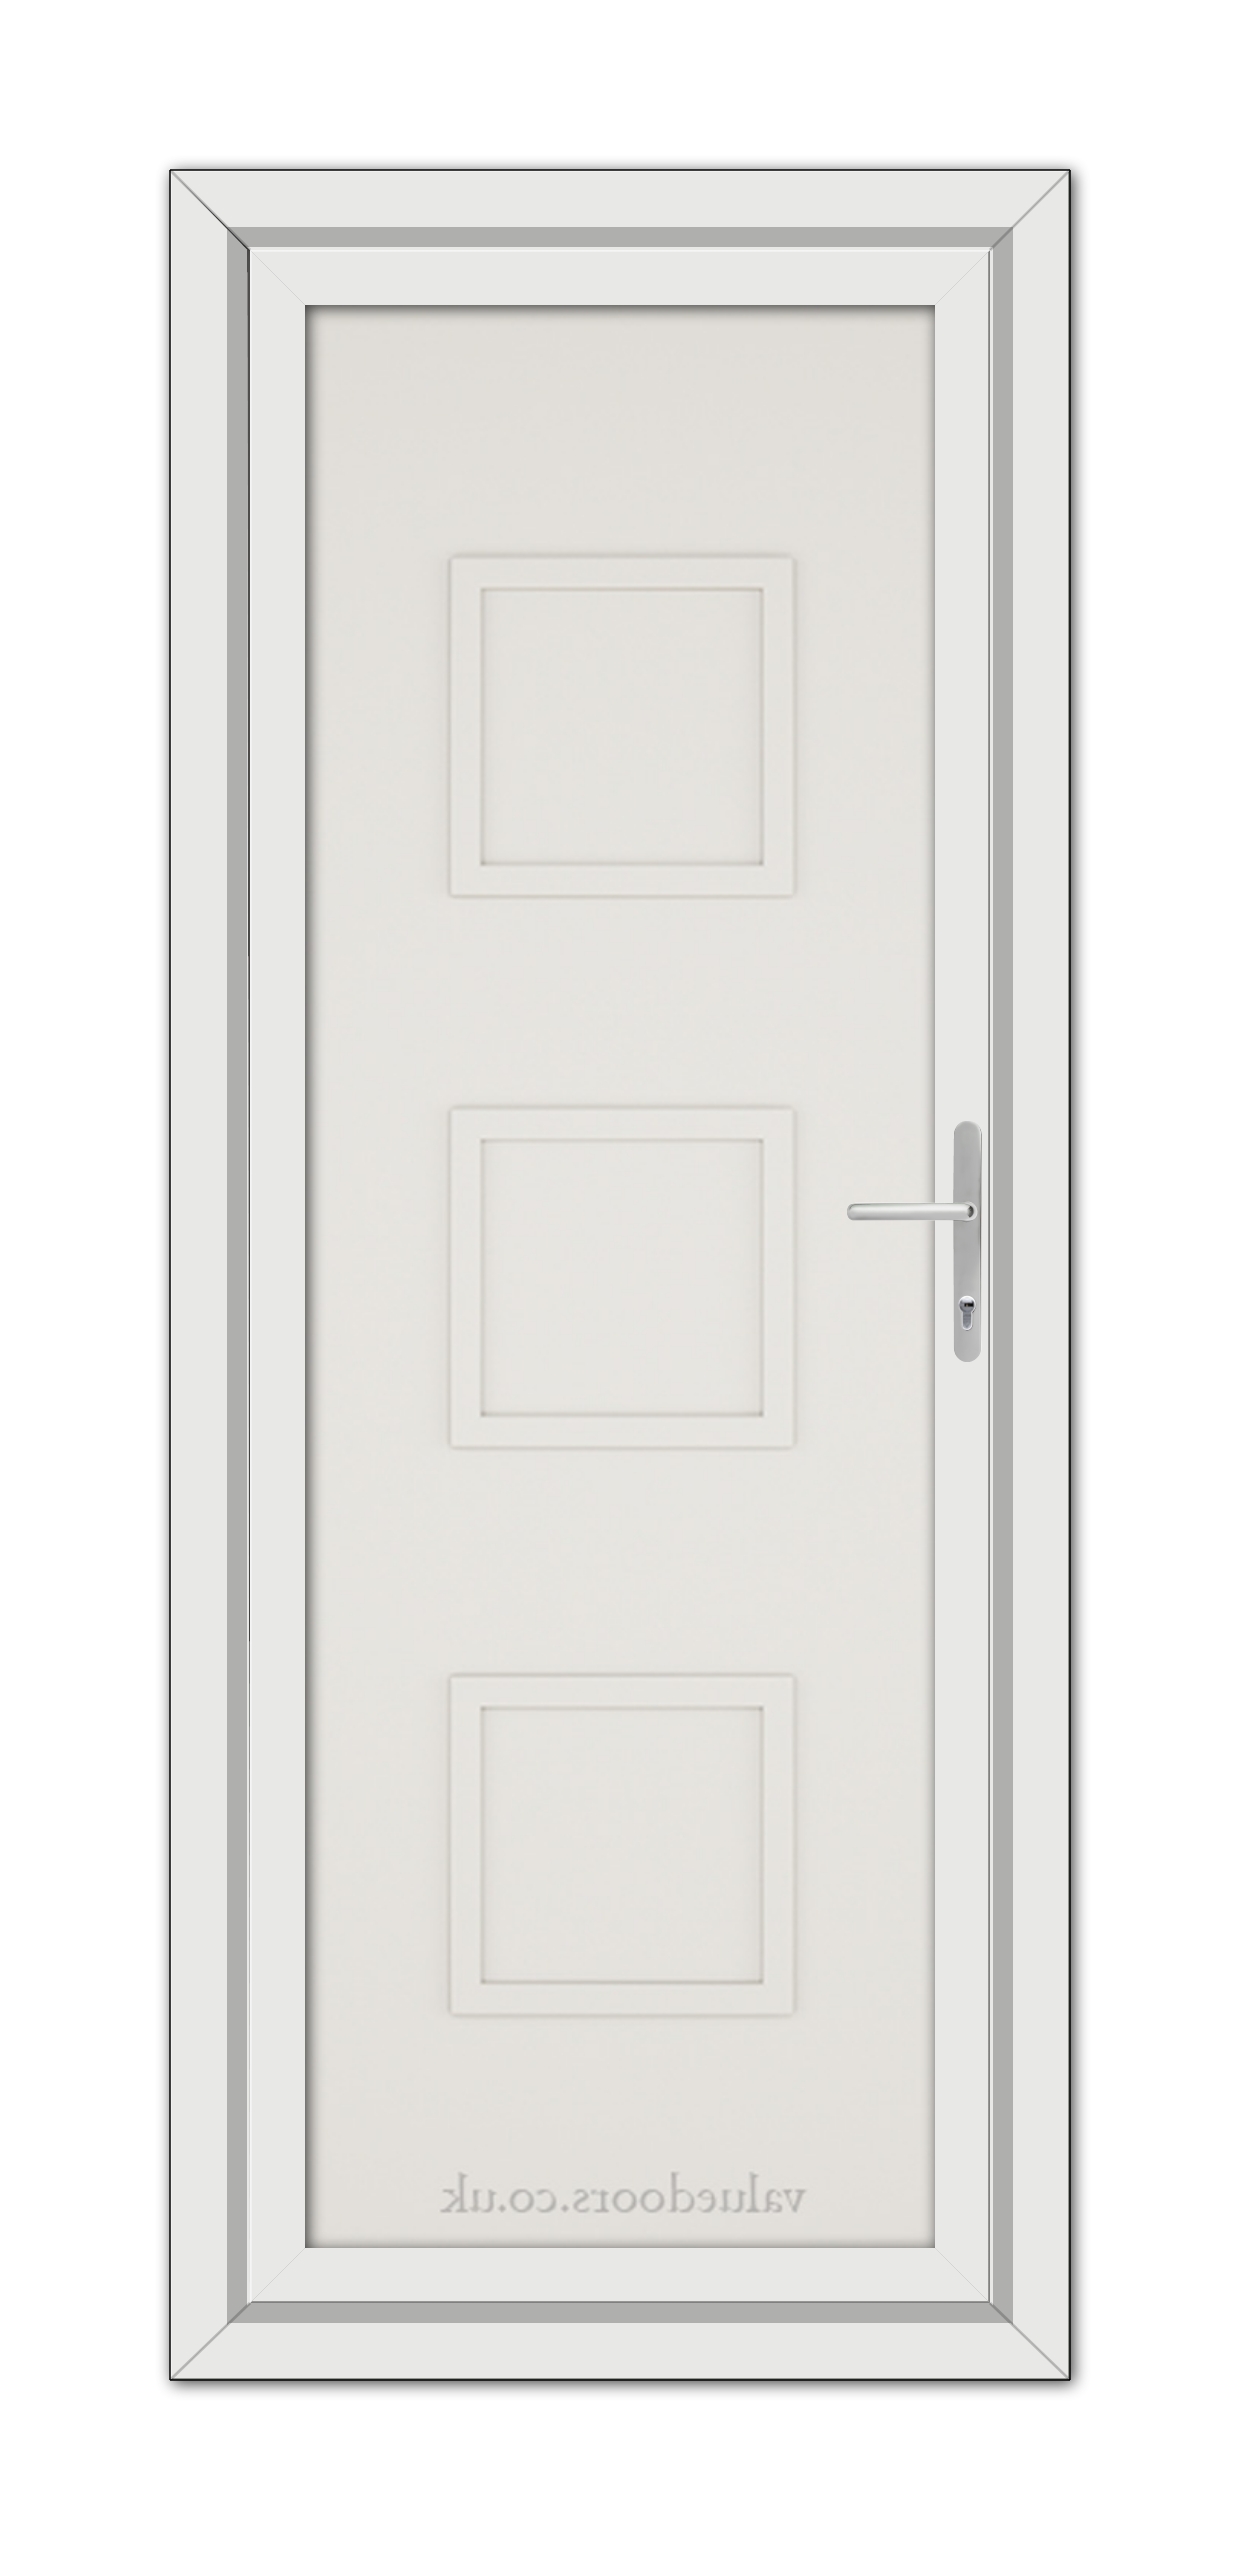 A vertical image of a closed White Cream Modern 5013 Solid uPVC Door featuring three rectangular panels and a metallic handle, set within a white frame.